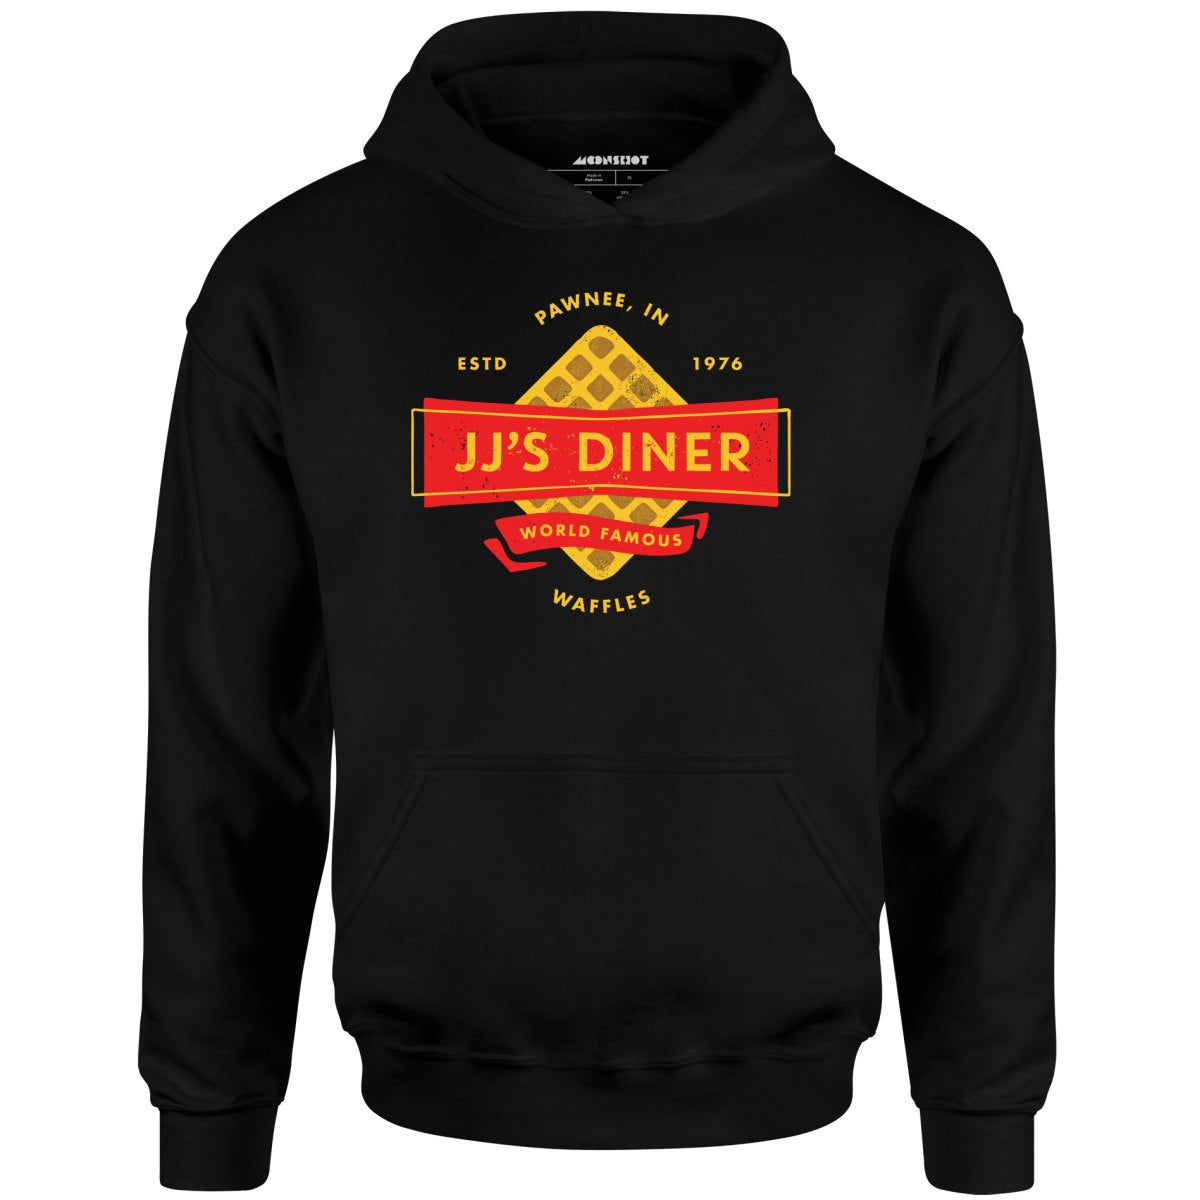 JJ's Diner - Parks and Recreation - Unisex Hoodie